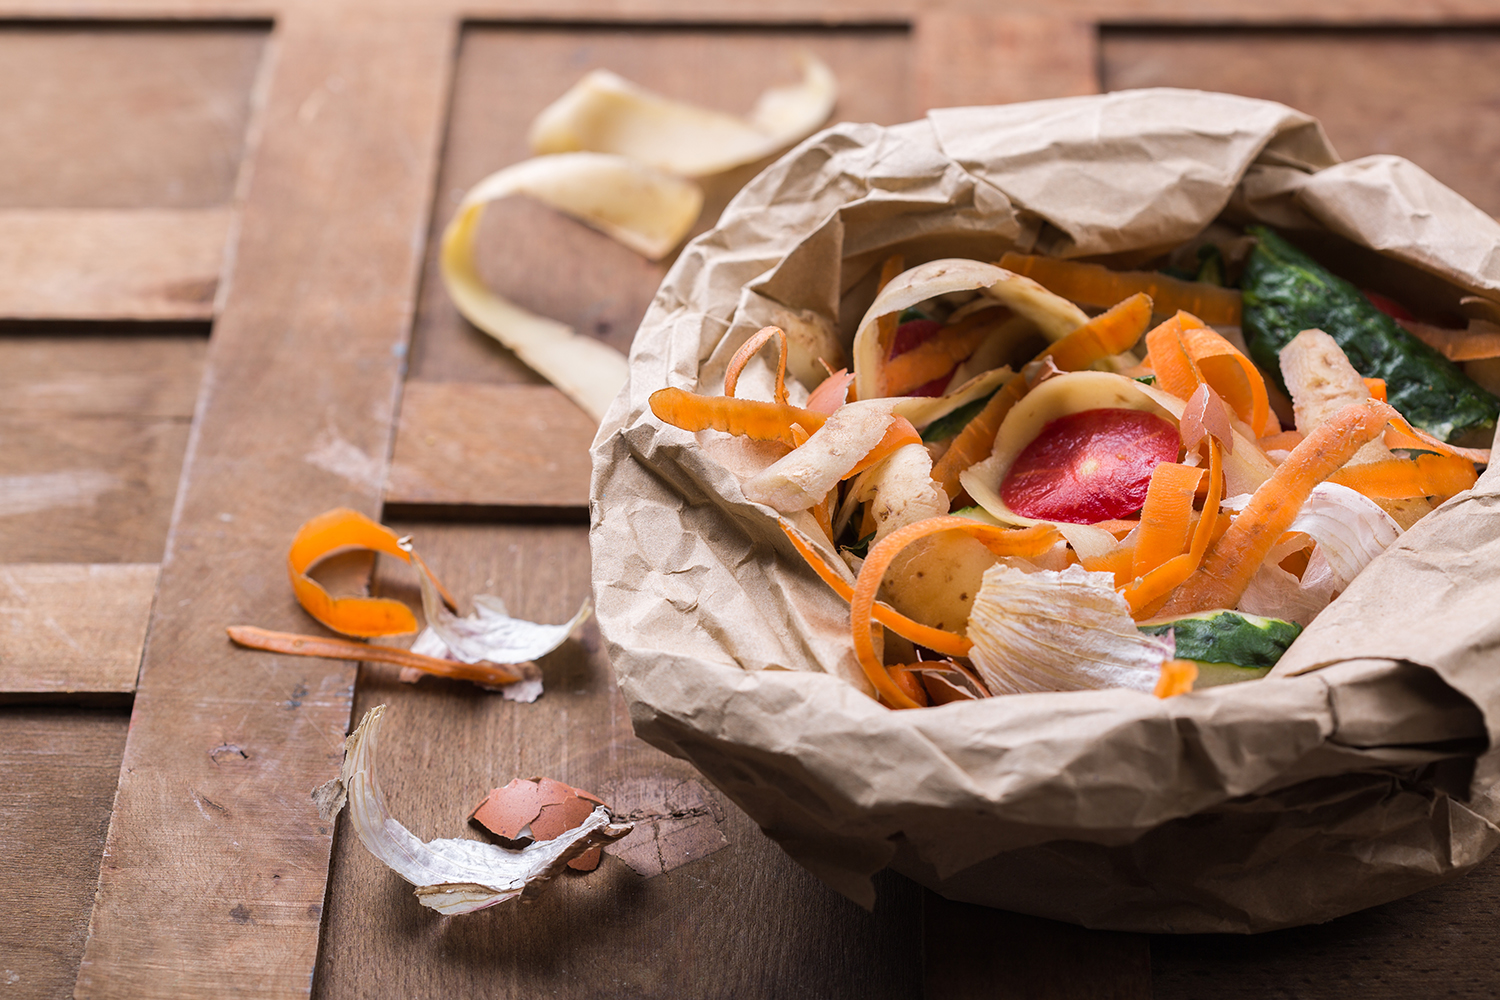 Composting 101: How (and Why) to Start Composting